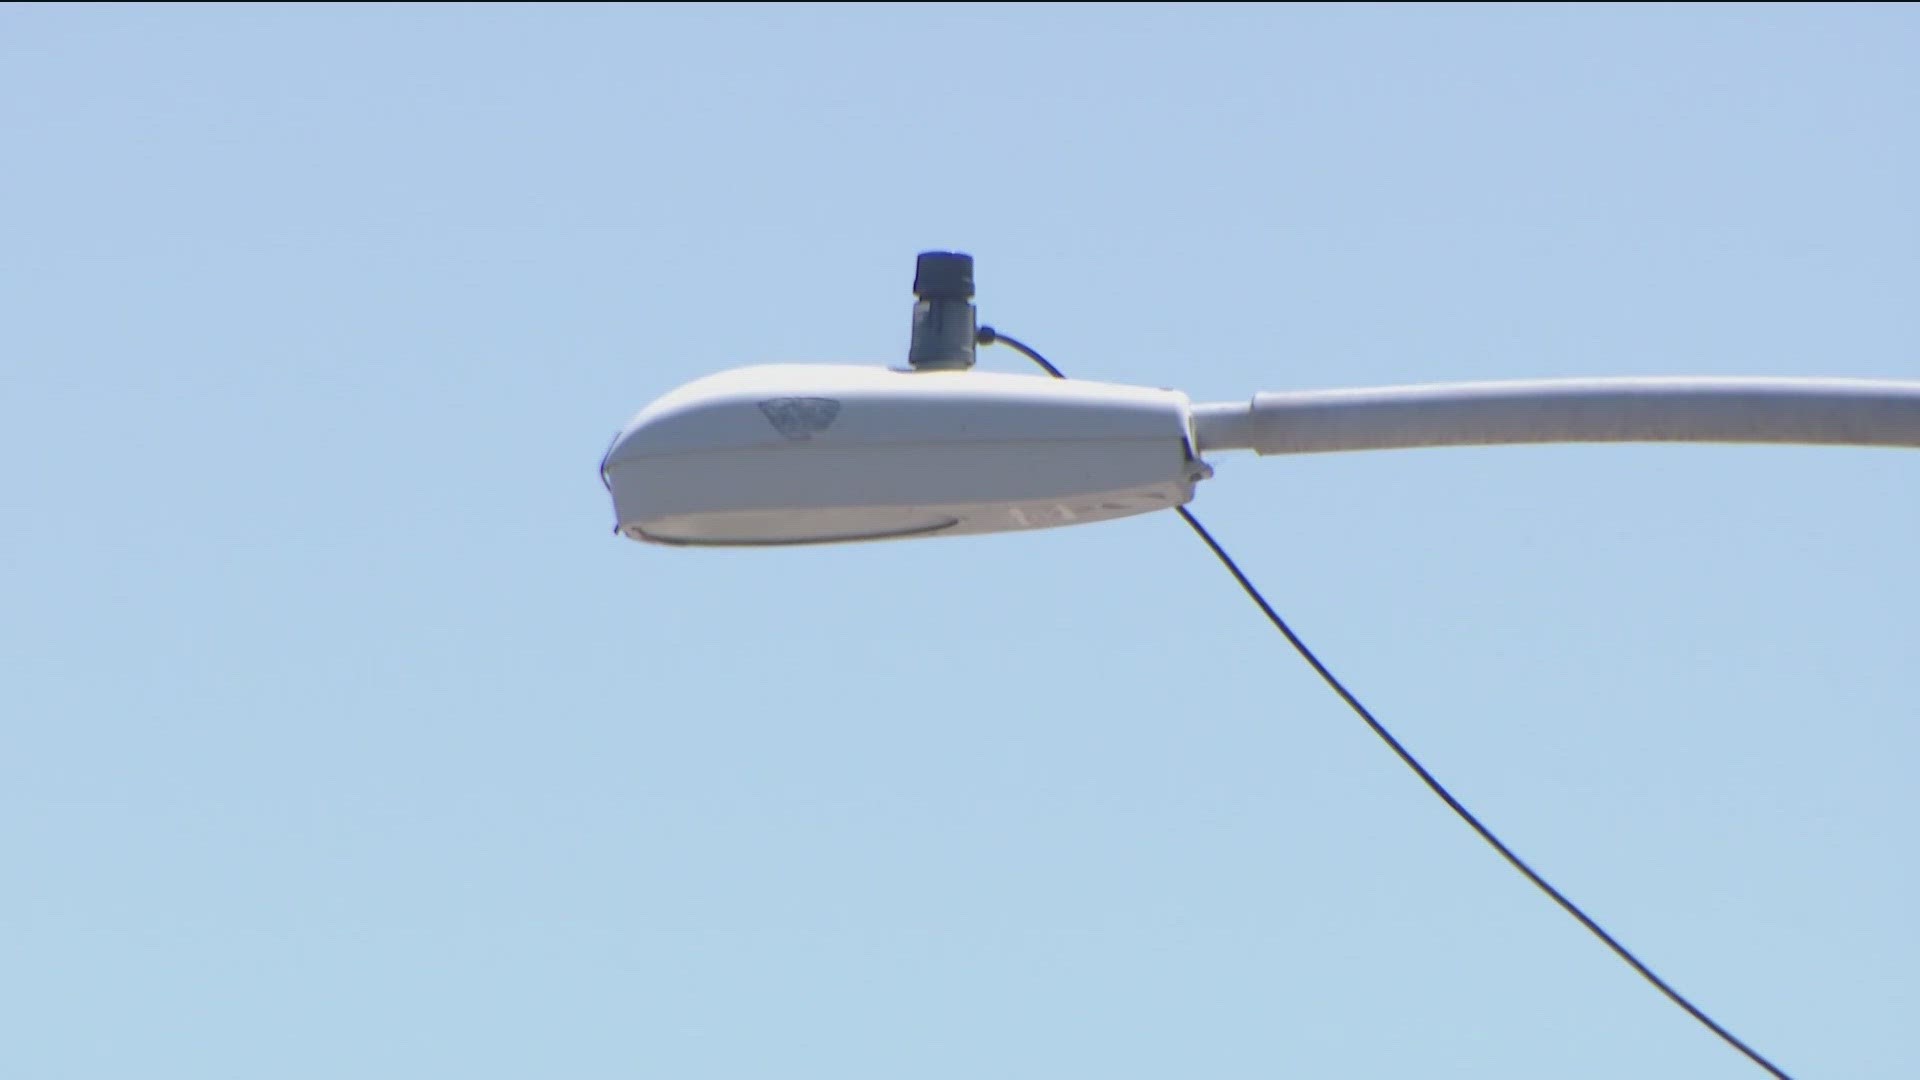 The proposal to move forward comes three years after privacy concerns and cost overruns forced the city to discontinue its first attempt at Smart Streetlights.